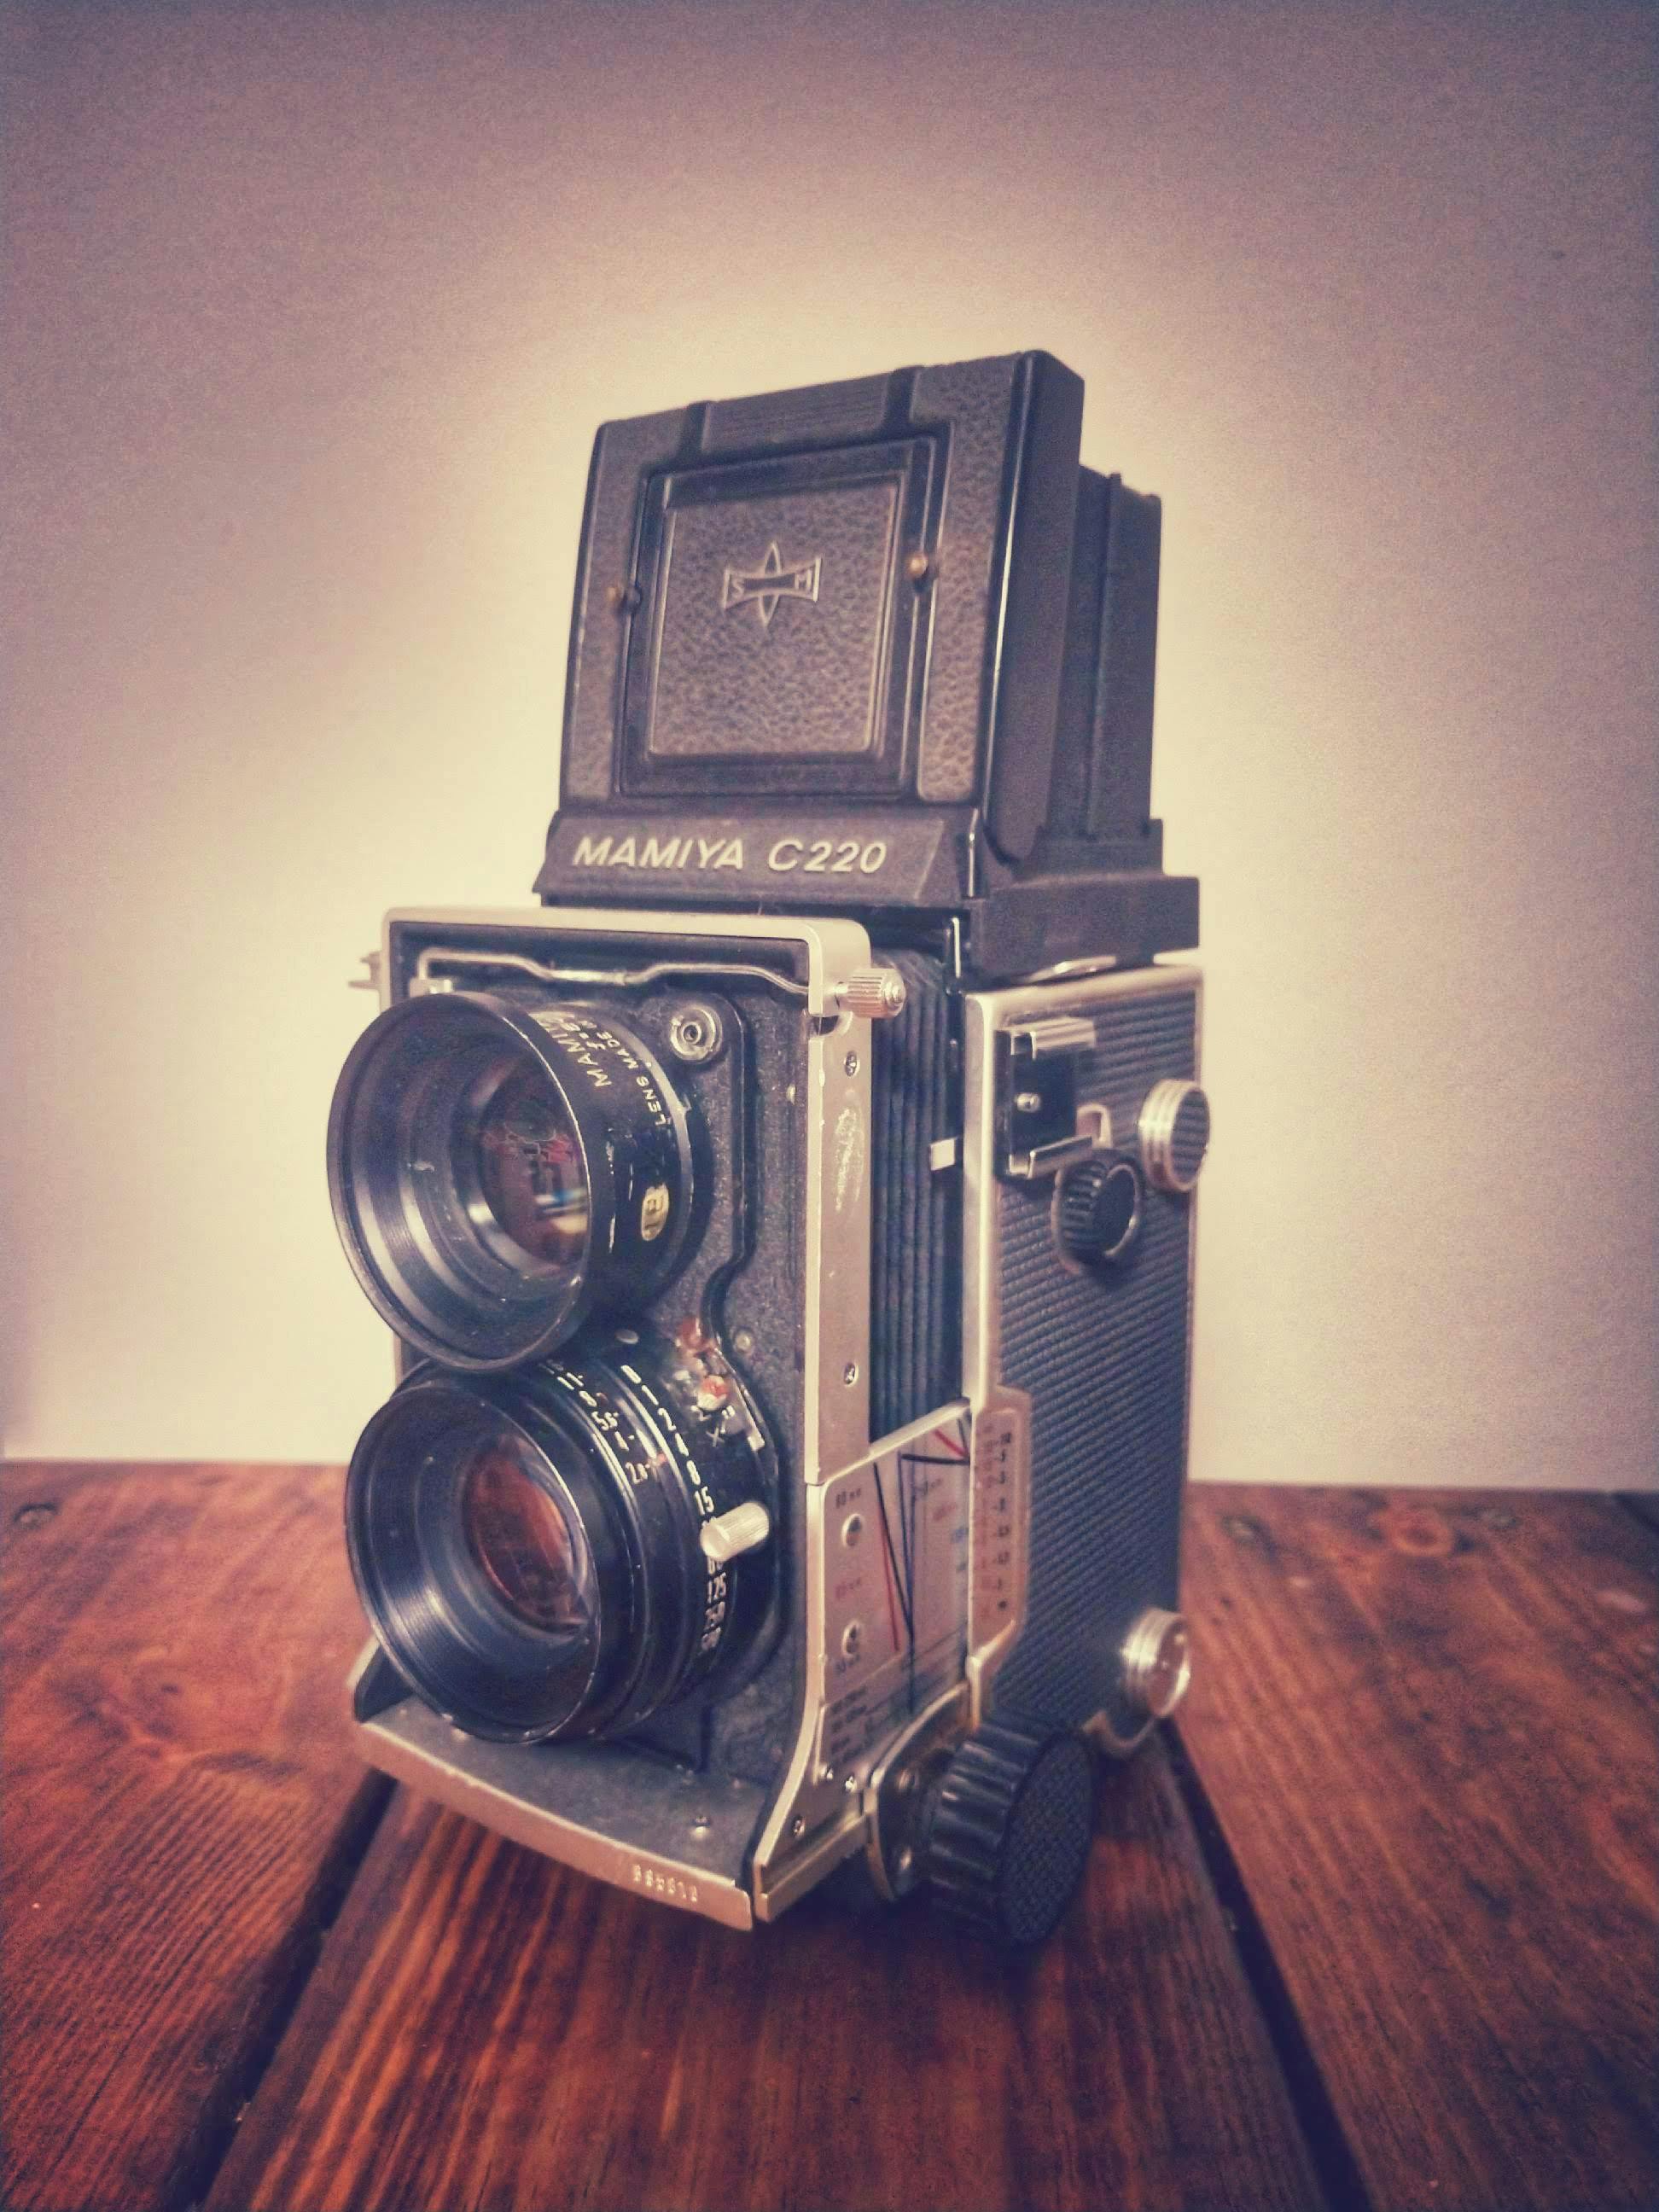 Free stock photo of analog camera, tlr, twin lens reflex